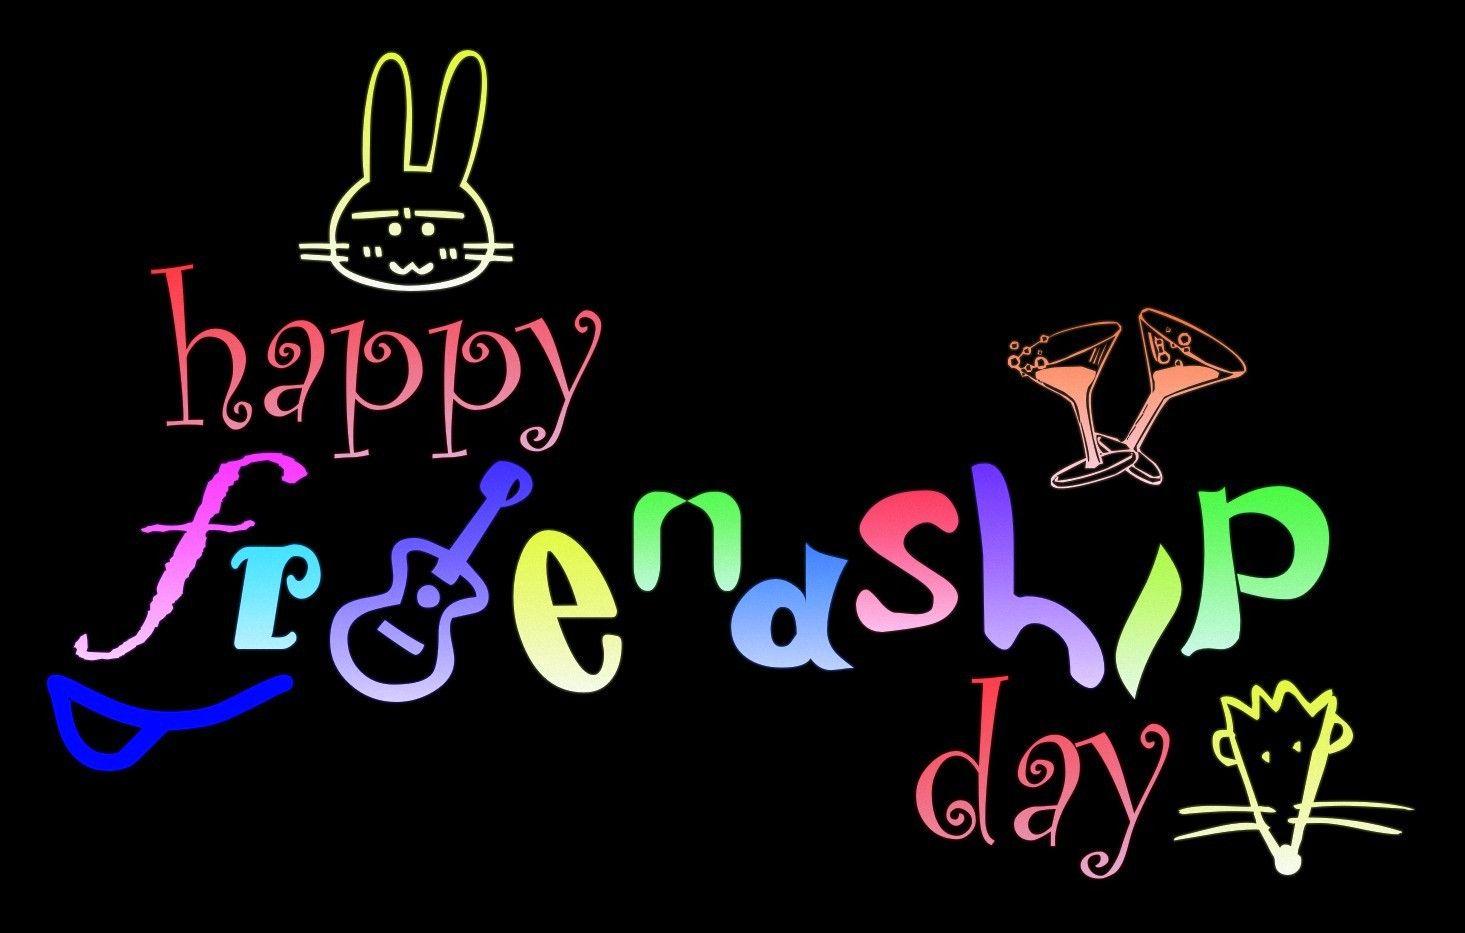 Friendship Day Wallpapers - Top Free Friendship Day Backgrounds ...